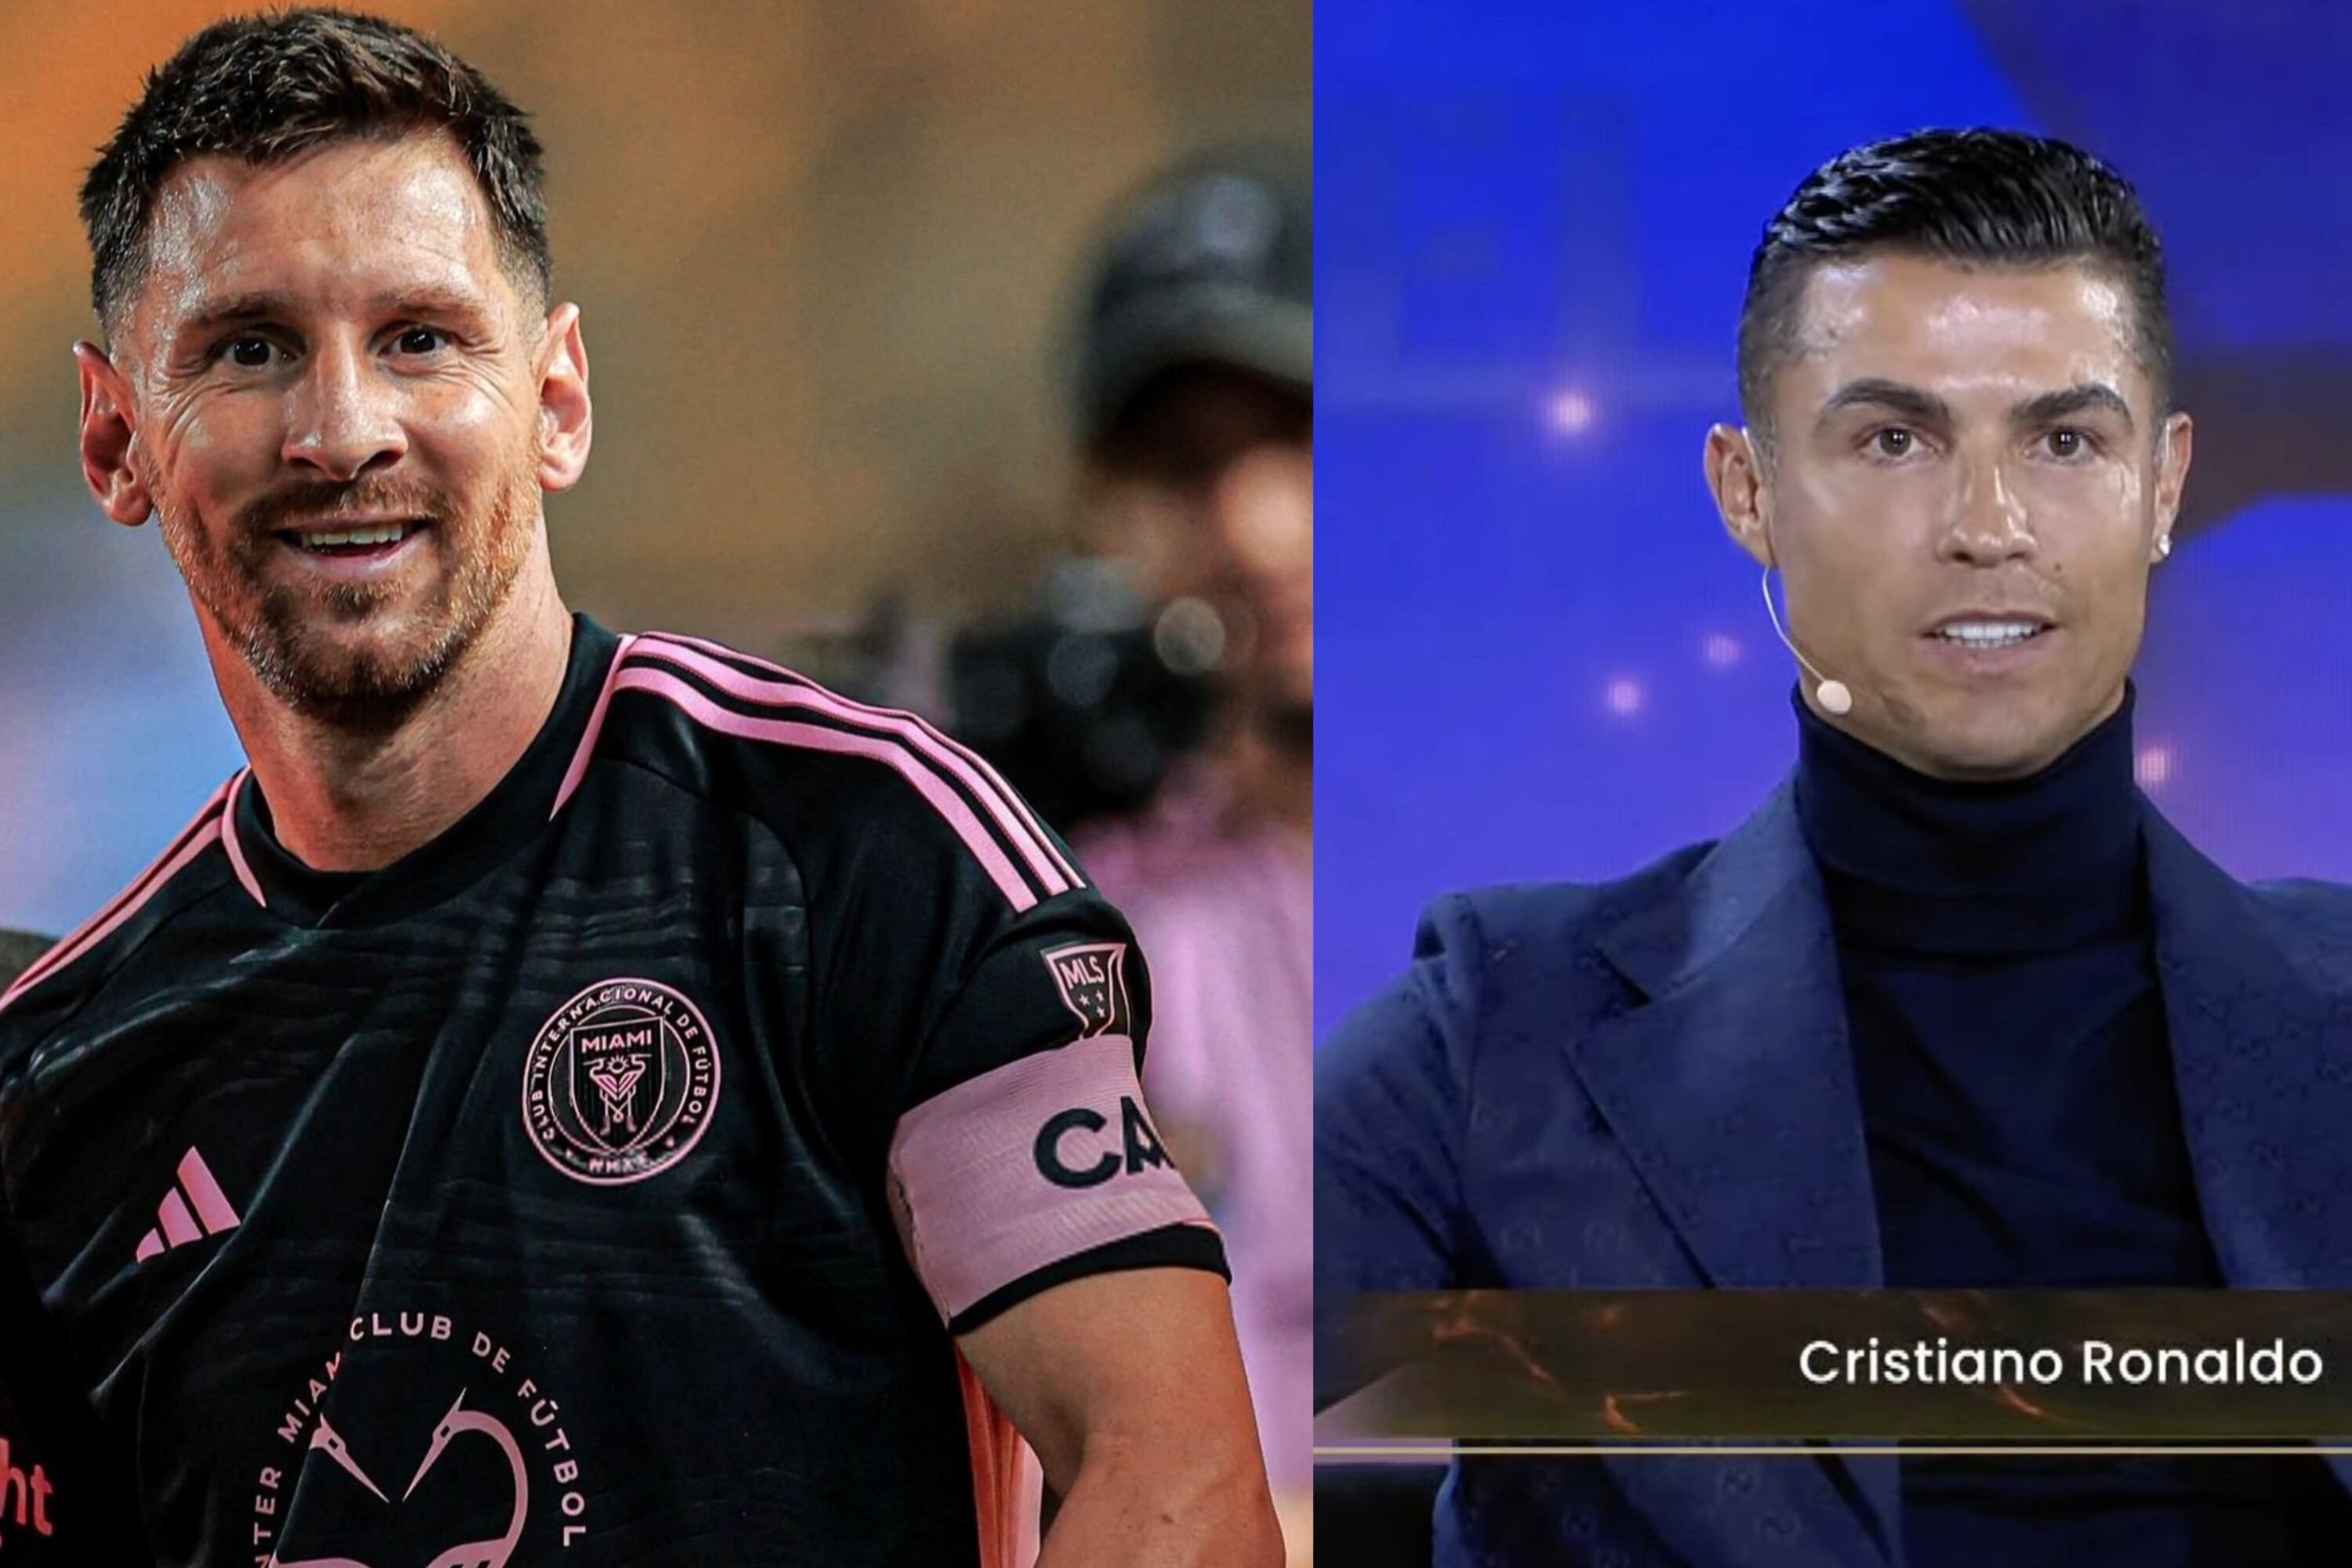 Although Messi wins all the awards, Cristiano Ronaldo claims that he's the best